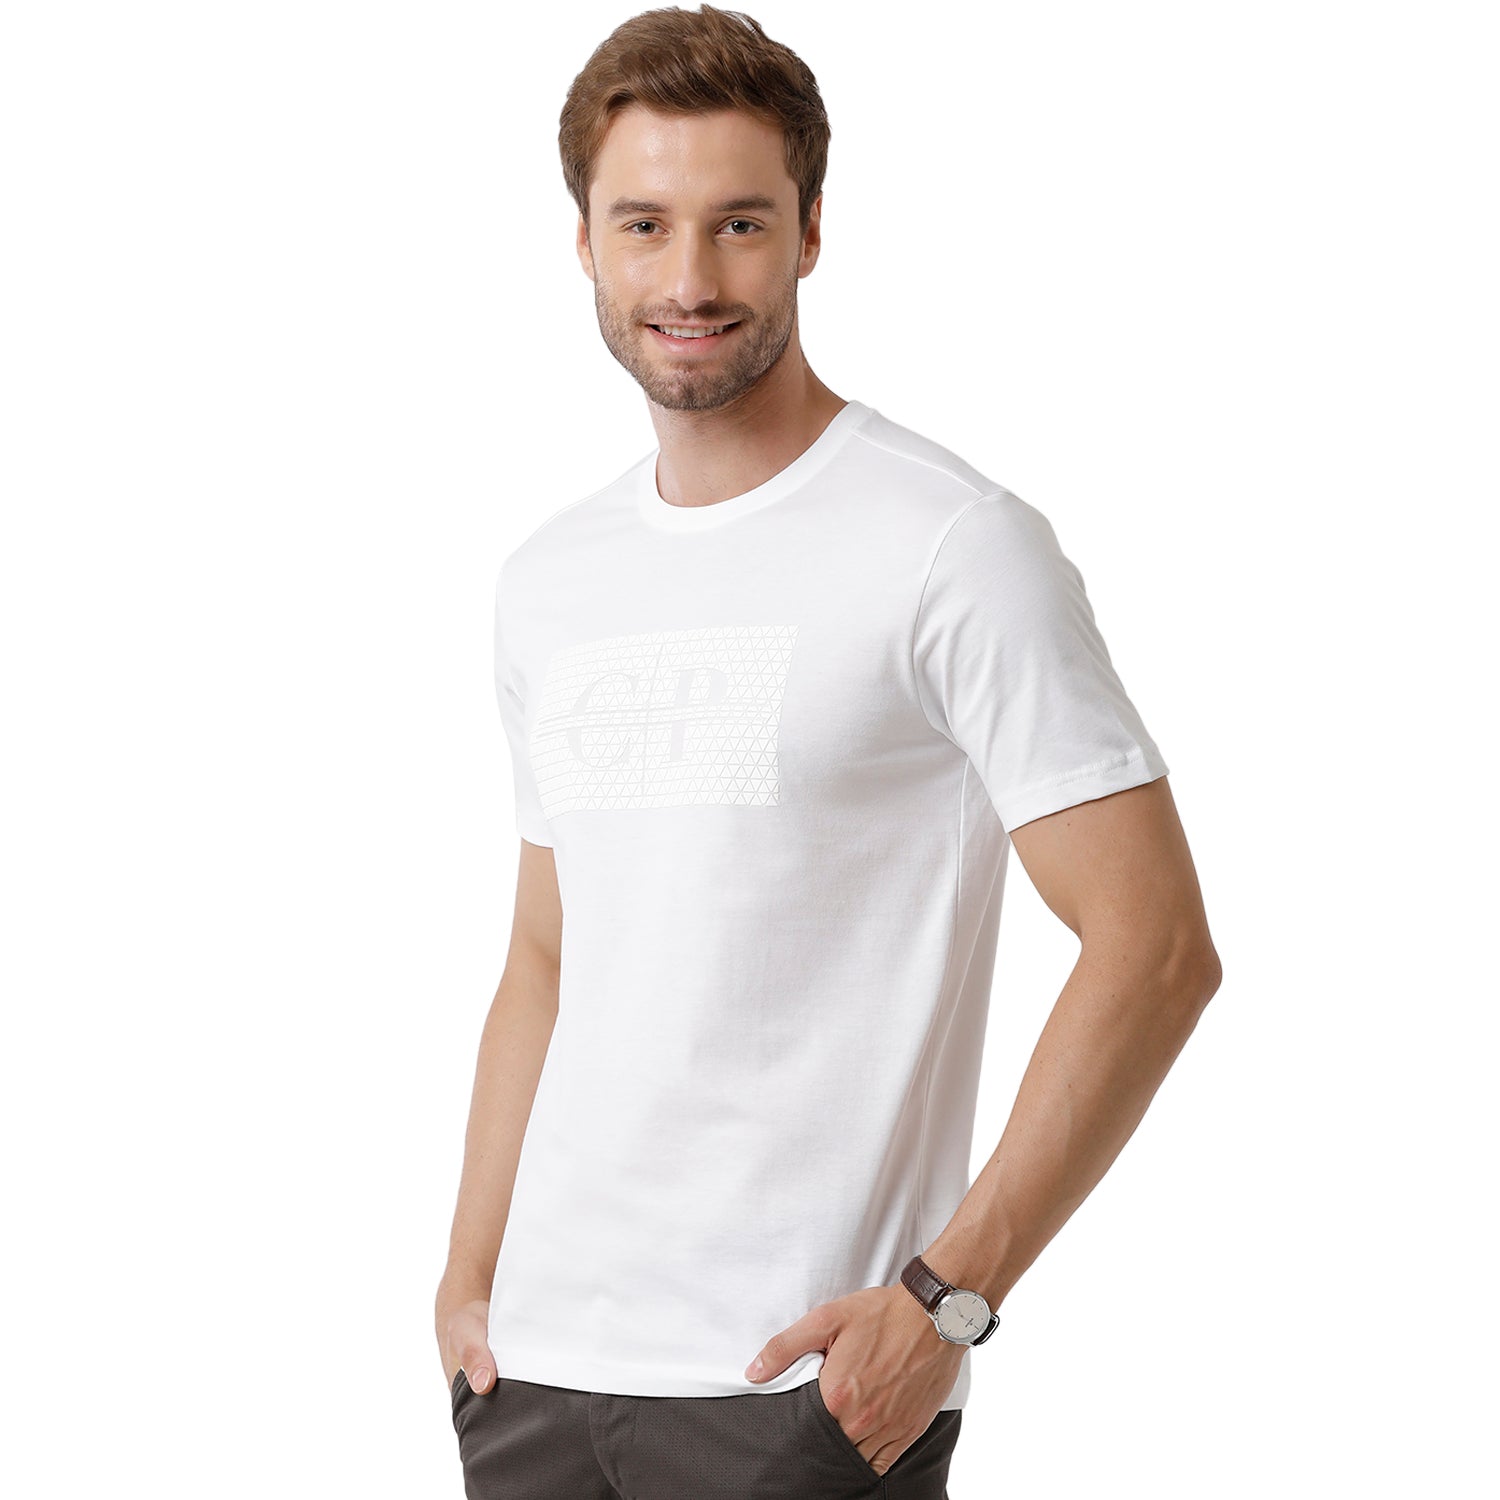 Men's White Color Half Sleeve Round Neck Solid T Shirt - BALENO - 410 B SF C T-shirt Classic Polo 